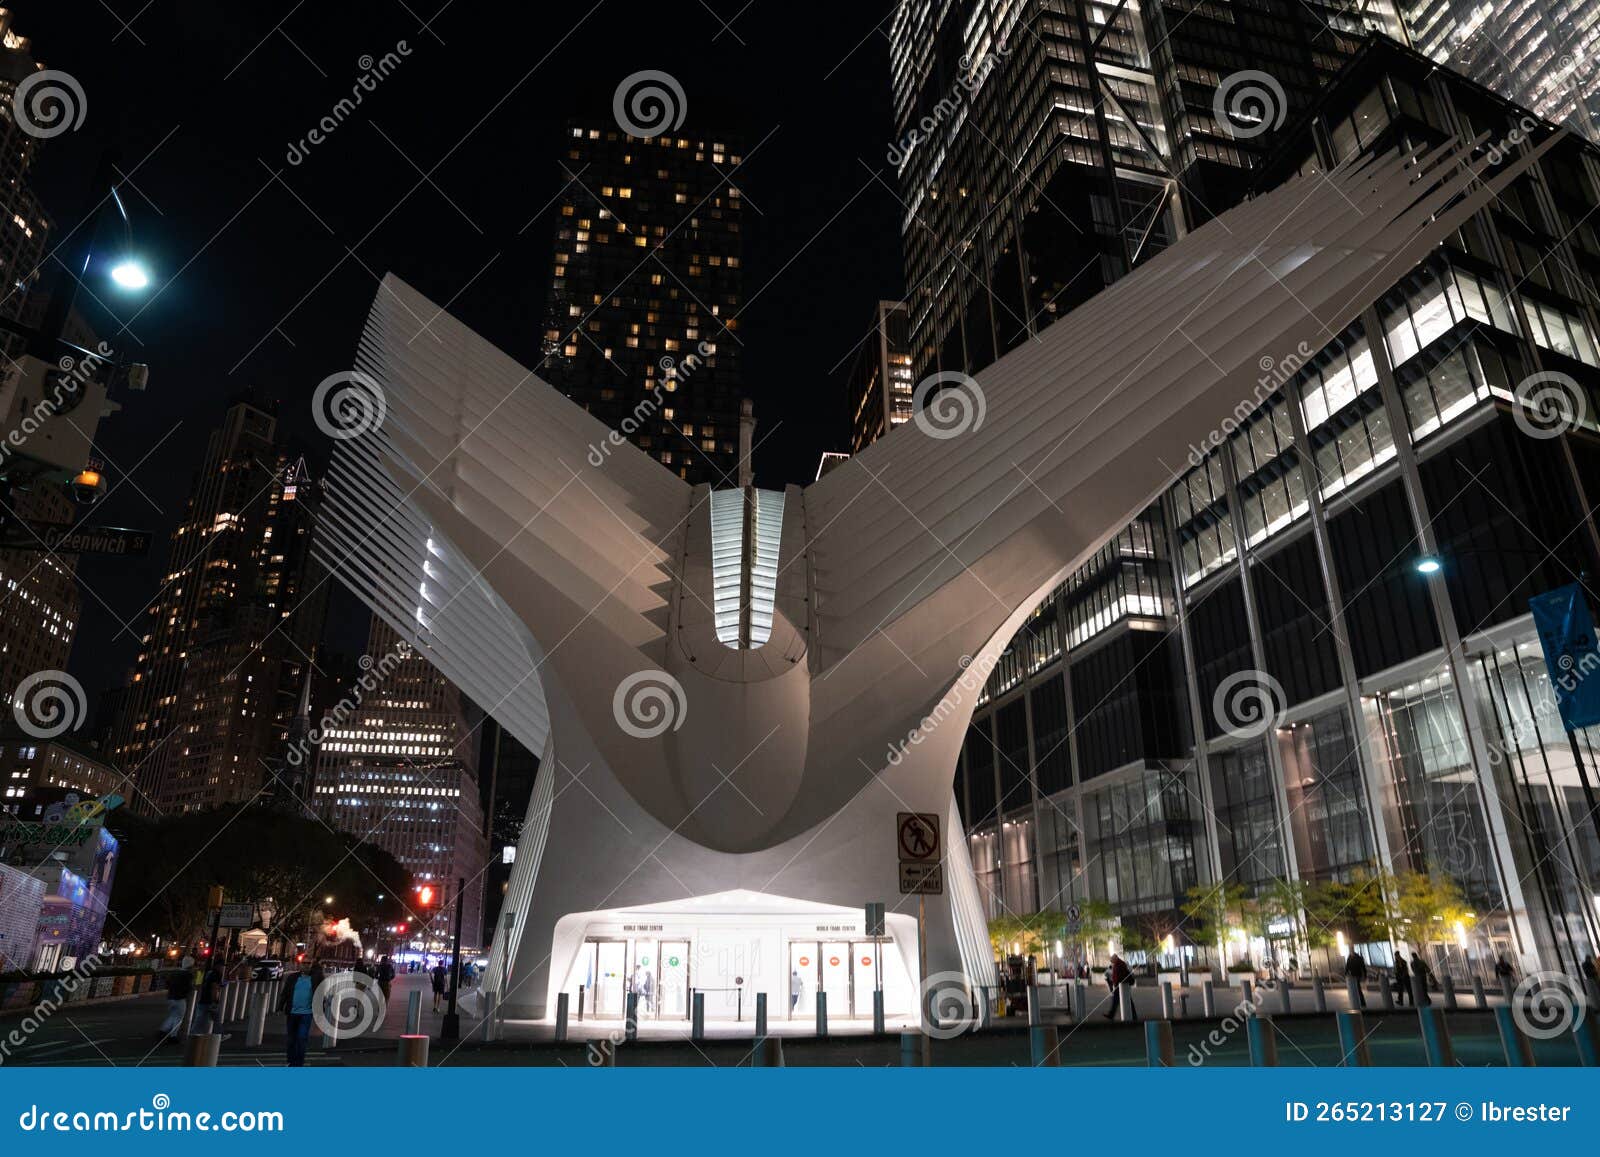 new york city, usa - oct, 2022: people shopping in westfield world trade center in manhattan